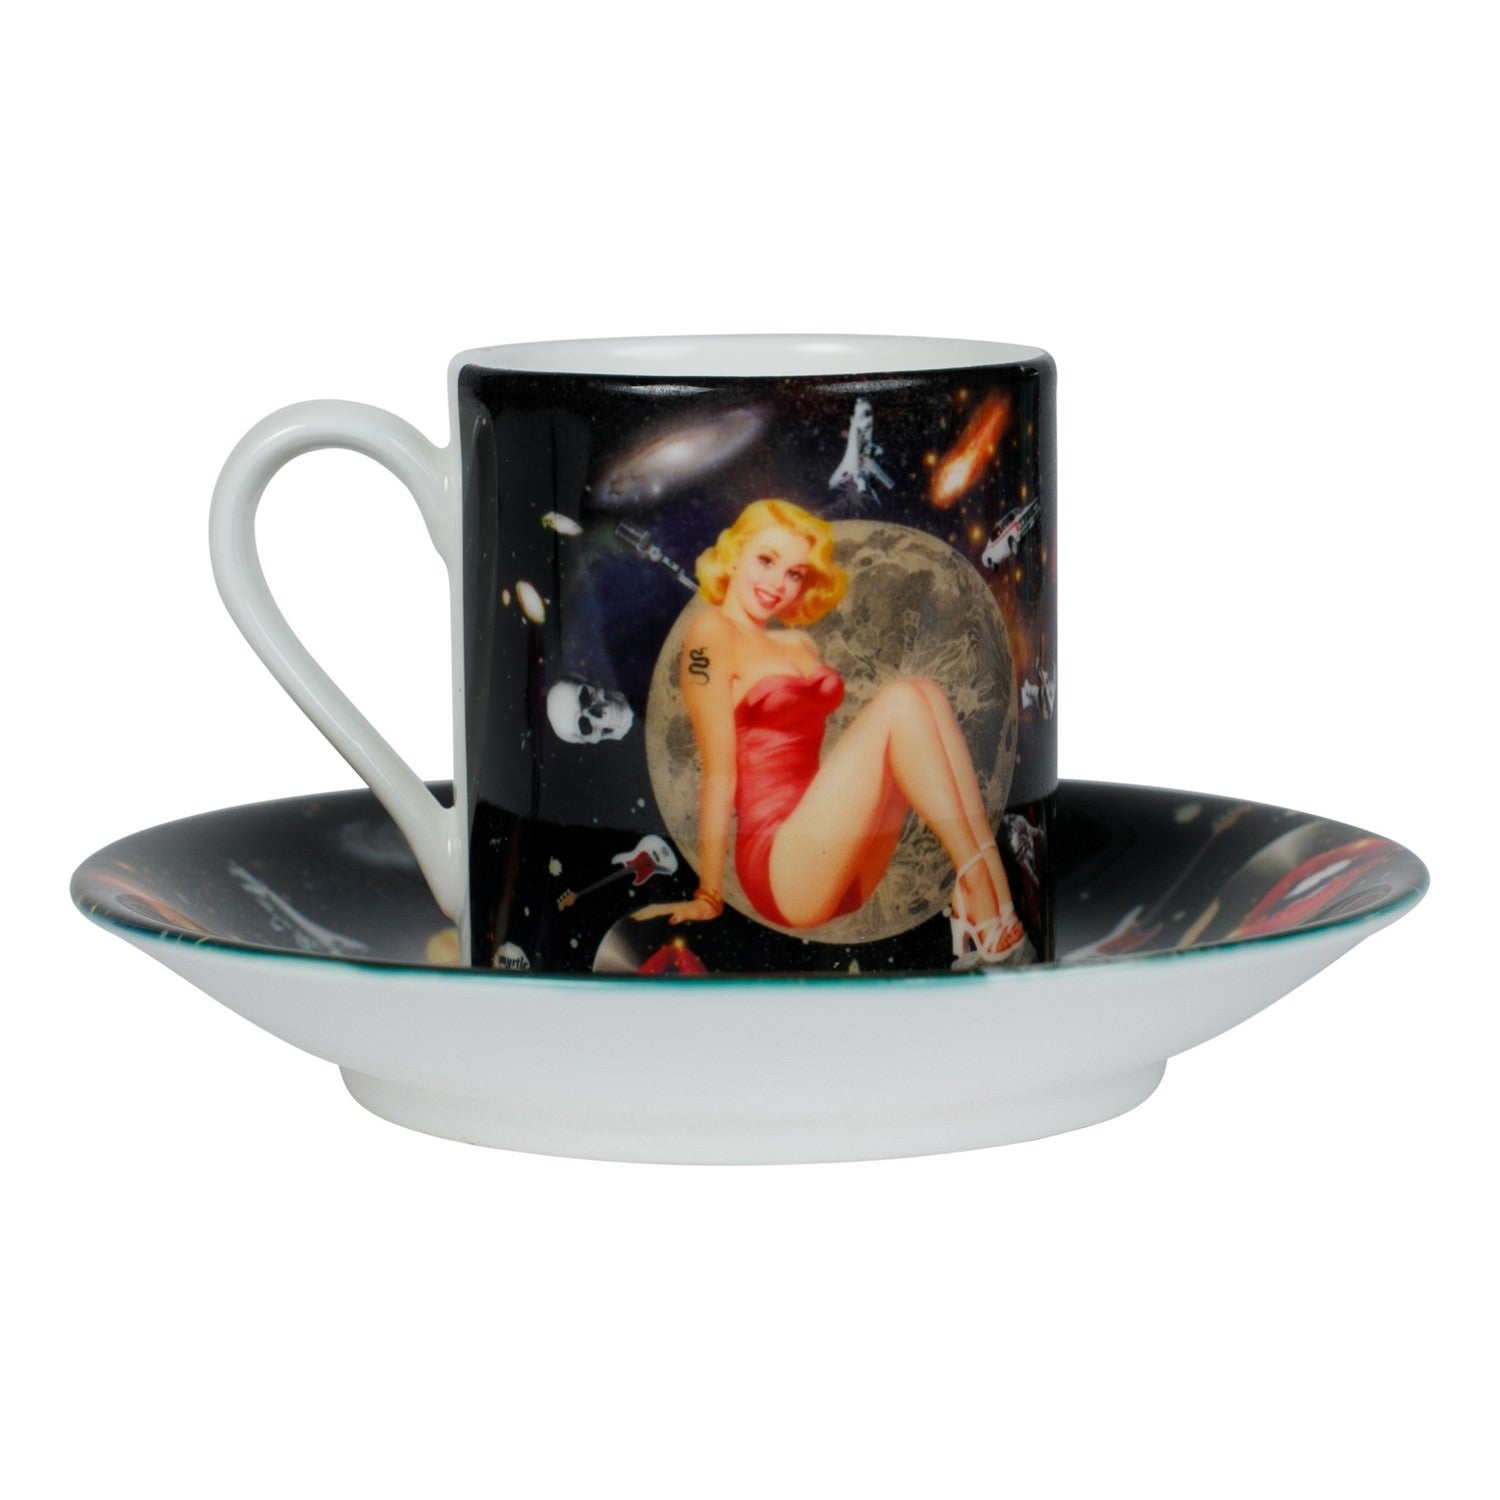 Luxury bone china espresso cup and saucer in a maximalist vintage pin-up rockstar design called - GiGi